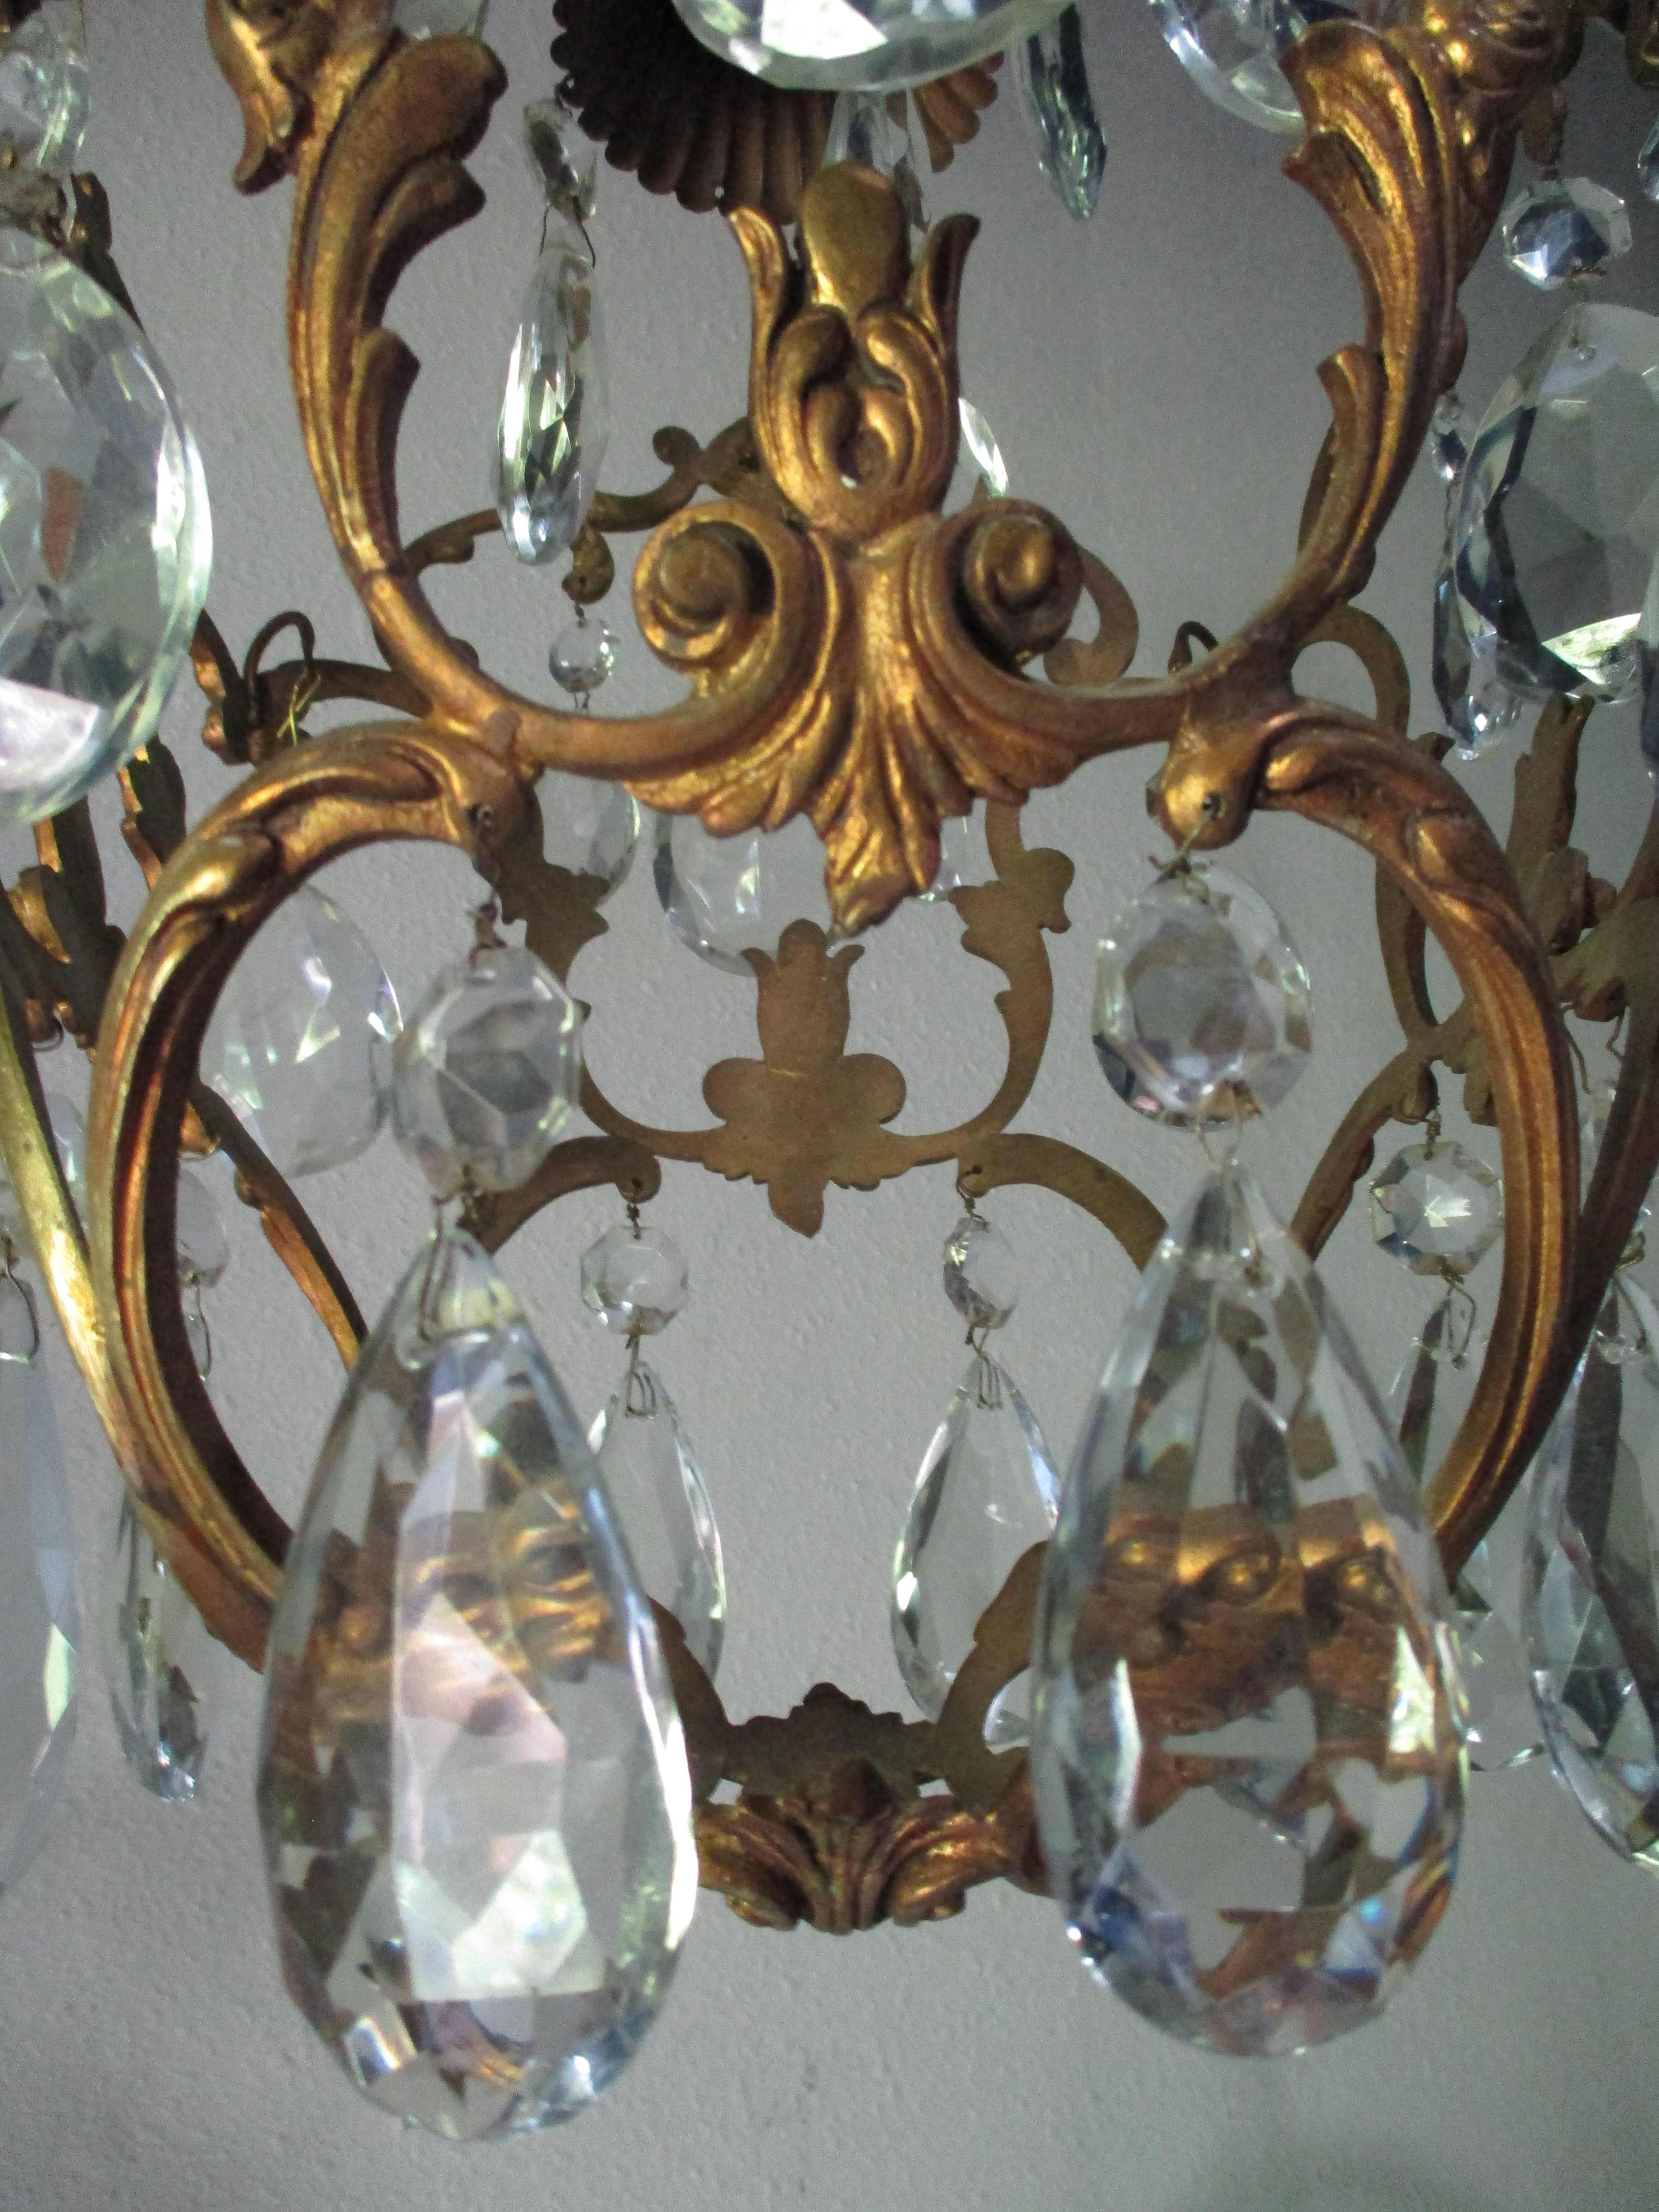 Elegant 20th century Italian belle époque cage chandelier with original cut crystals. This belle époque design the botanical forms of the cage, and the shapes of the crystal prisms, recall the rococo style of the 18th century. The design channels